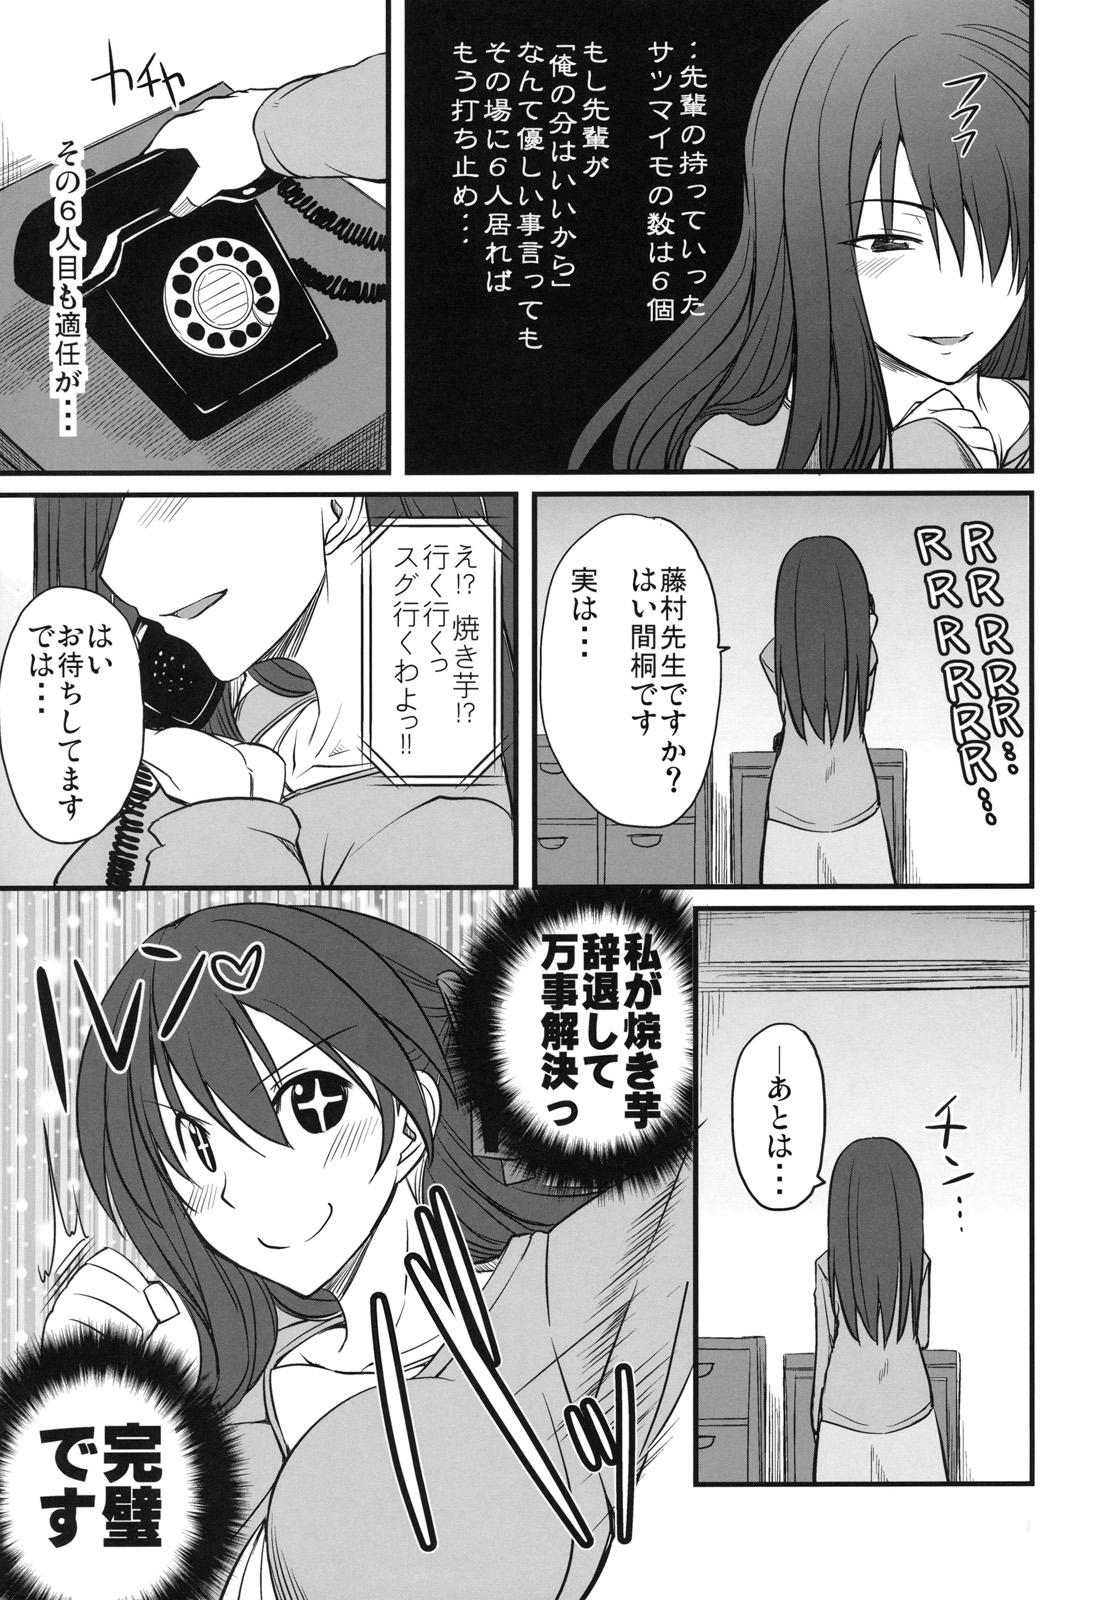 Old Vs Young One Day! vol. 17 - Fate stay night Brunettes - Page 10